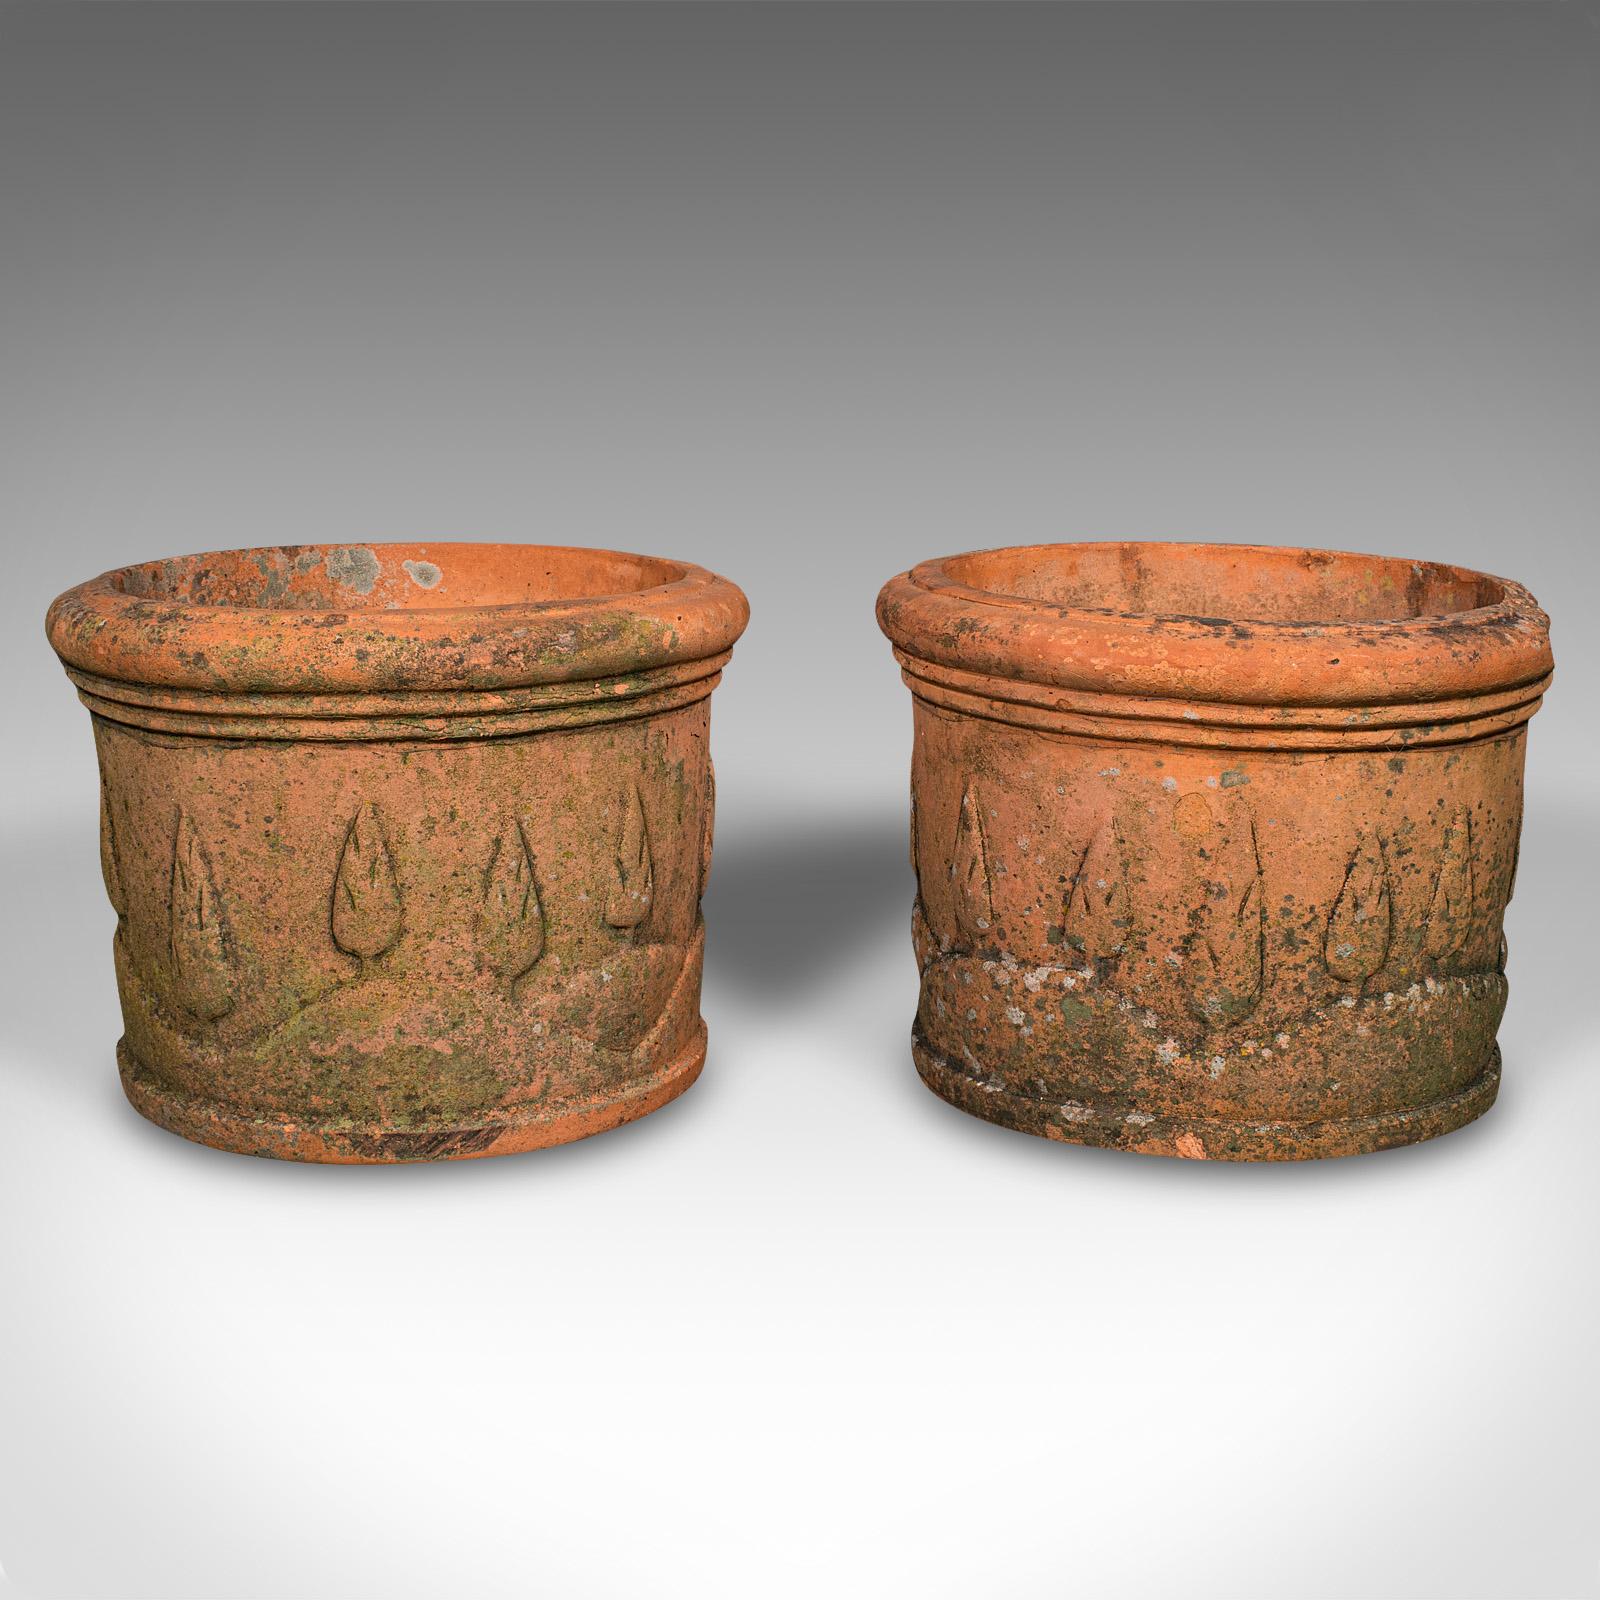 This is a pair of antique decorative planters. An Italian, terracotta outdoor jardiniere with Tuscan decor, dating to the late Victorian period, circa 1900.

Appealingly weathered with a charming decorative relief pattern
Displays a desirable aged